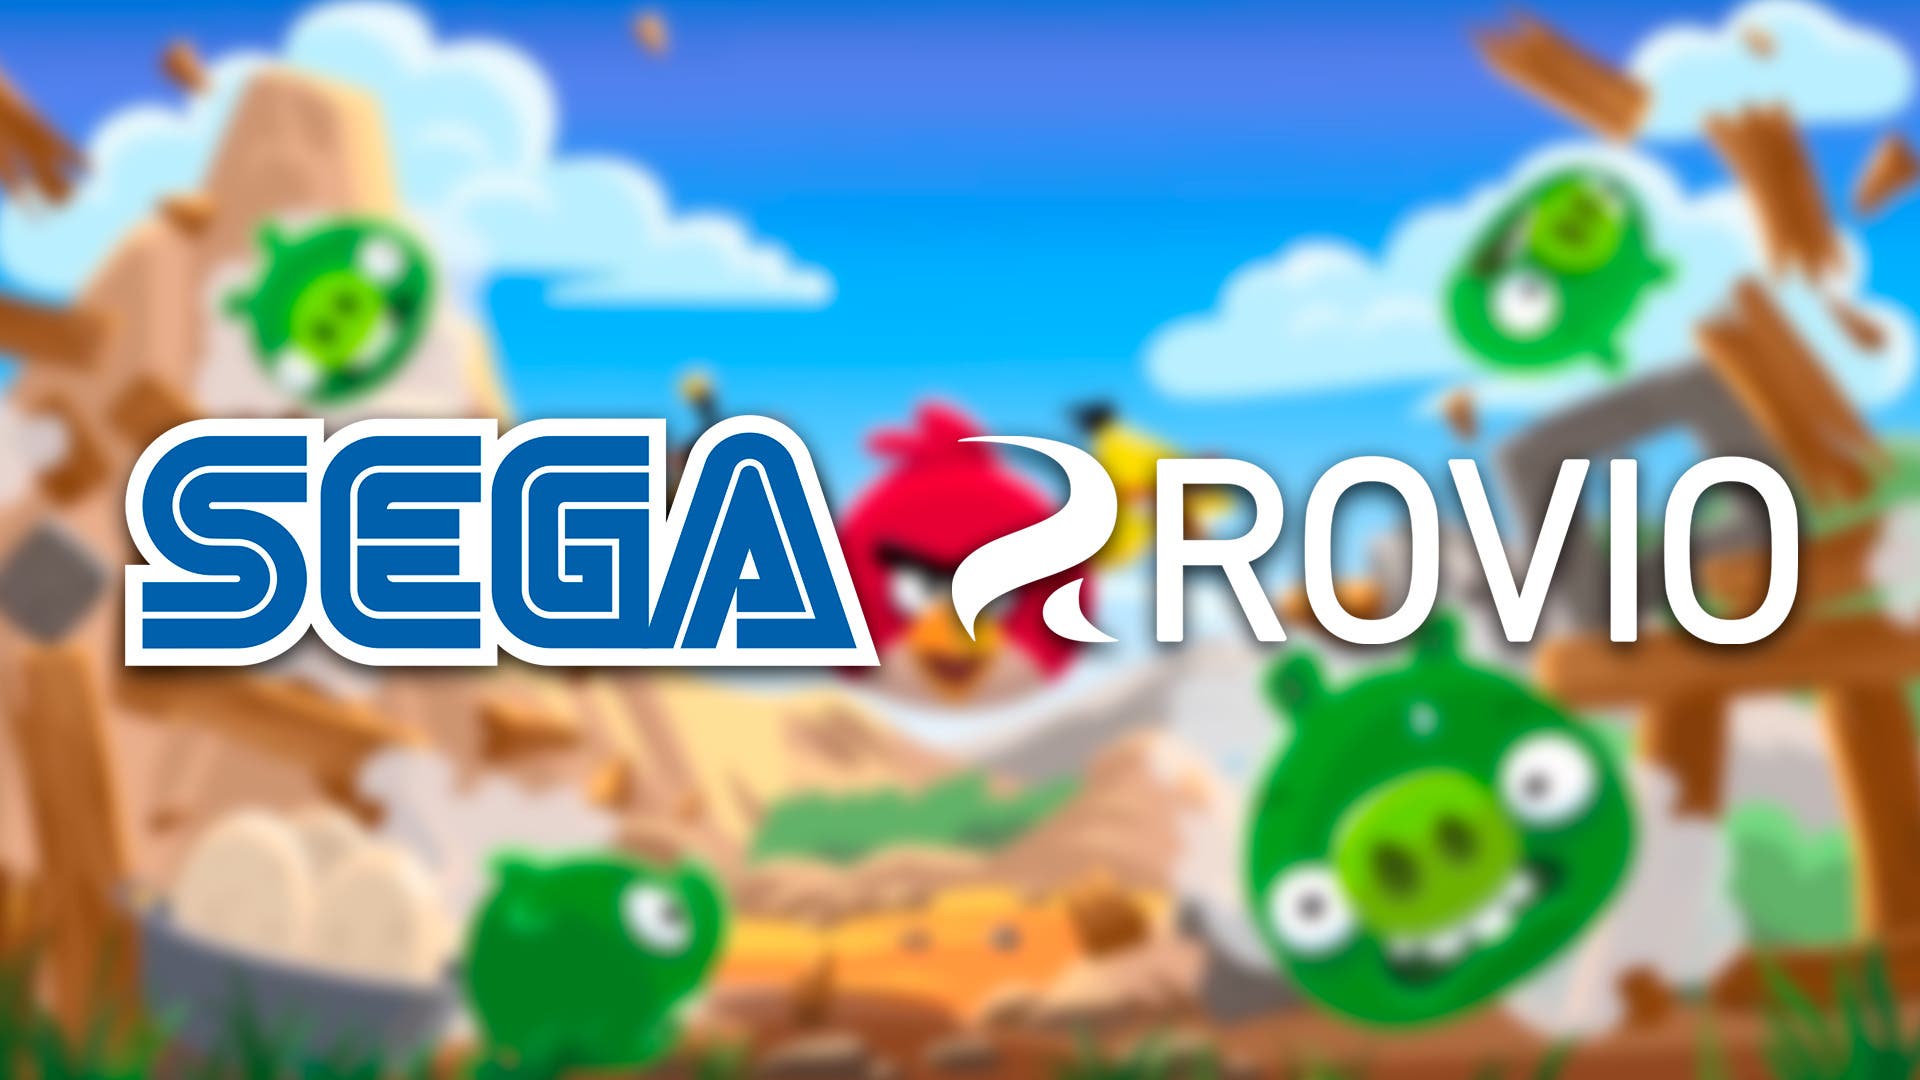 SEGA is close to acquiring Rovio, the creators of Angry Birds, for 1000 million dollars